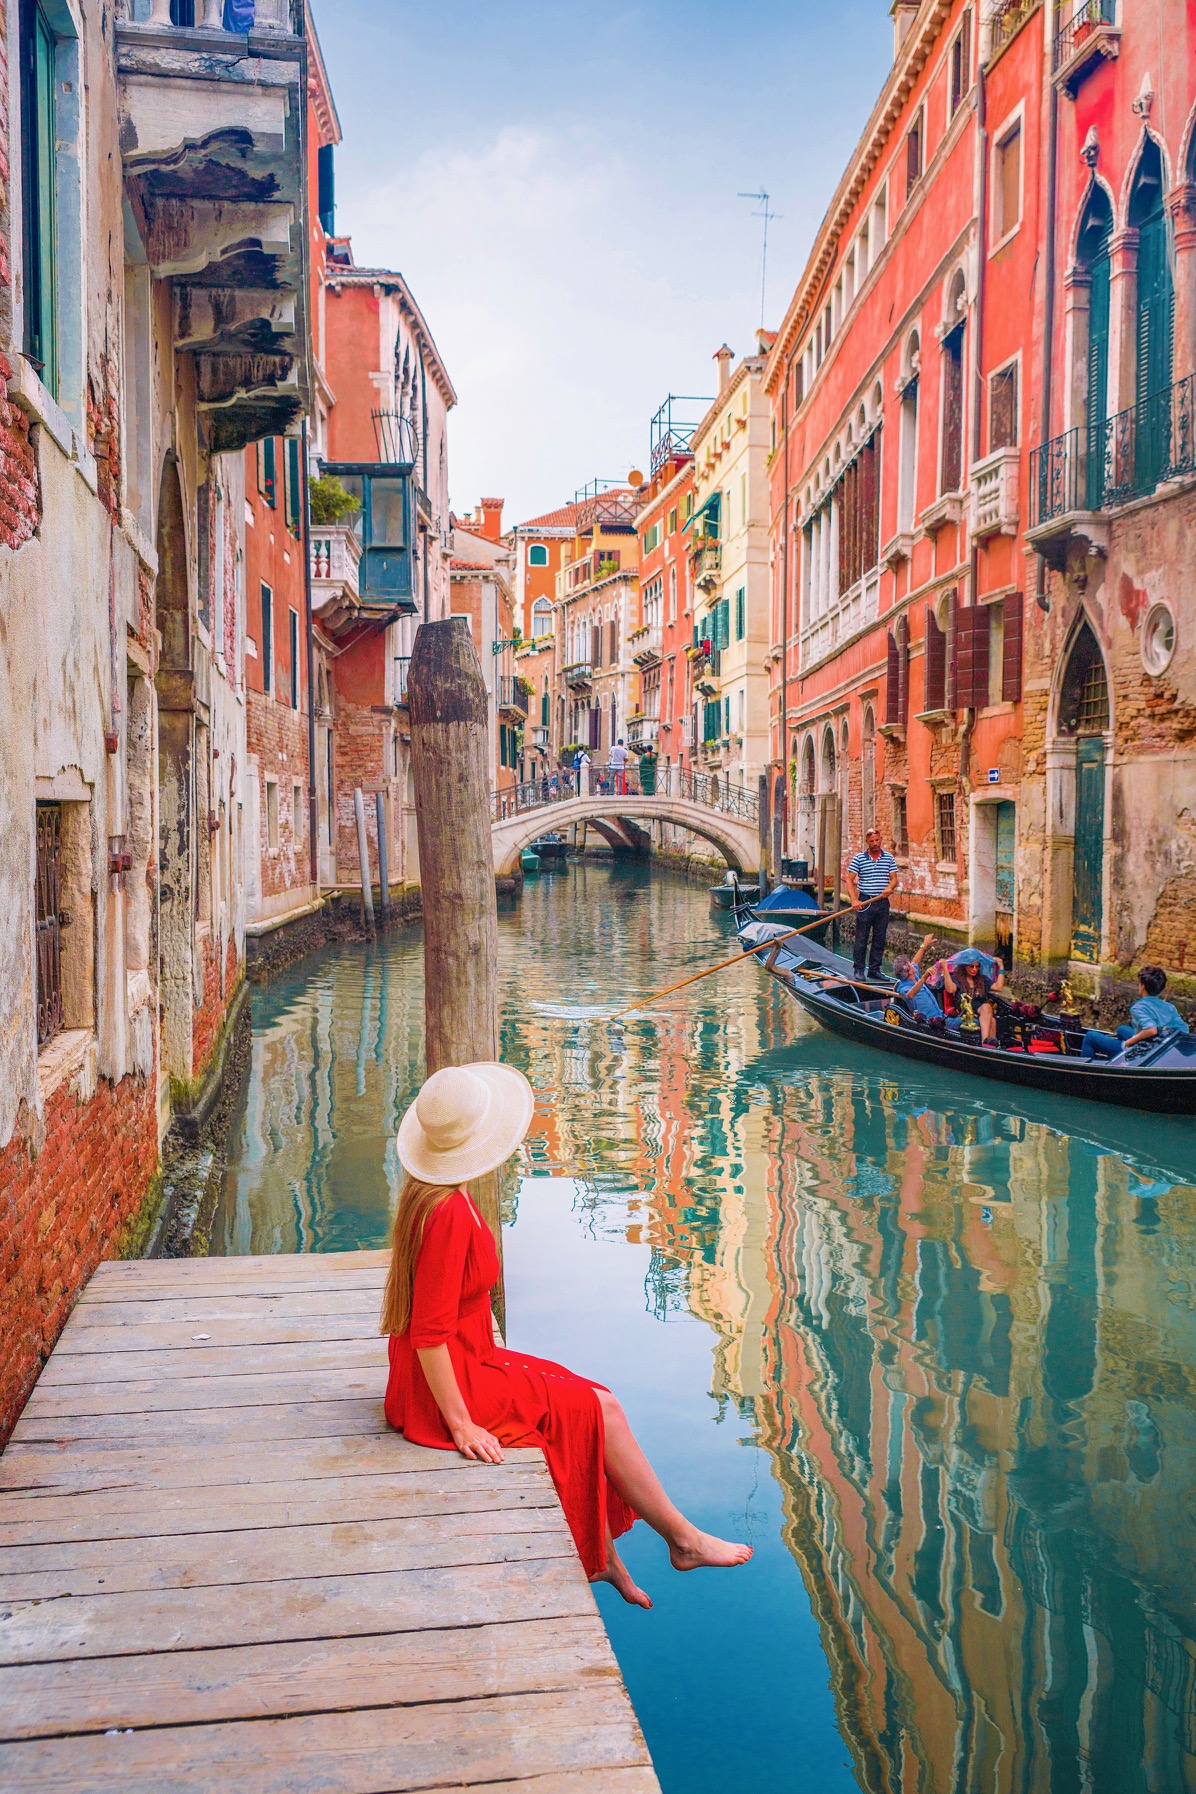 a girk in red dress and hat handing her feet over the dock on the canal as a gondola passes by